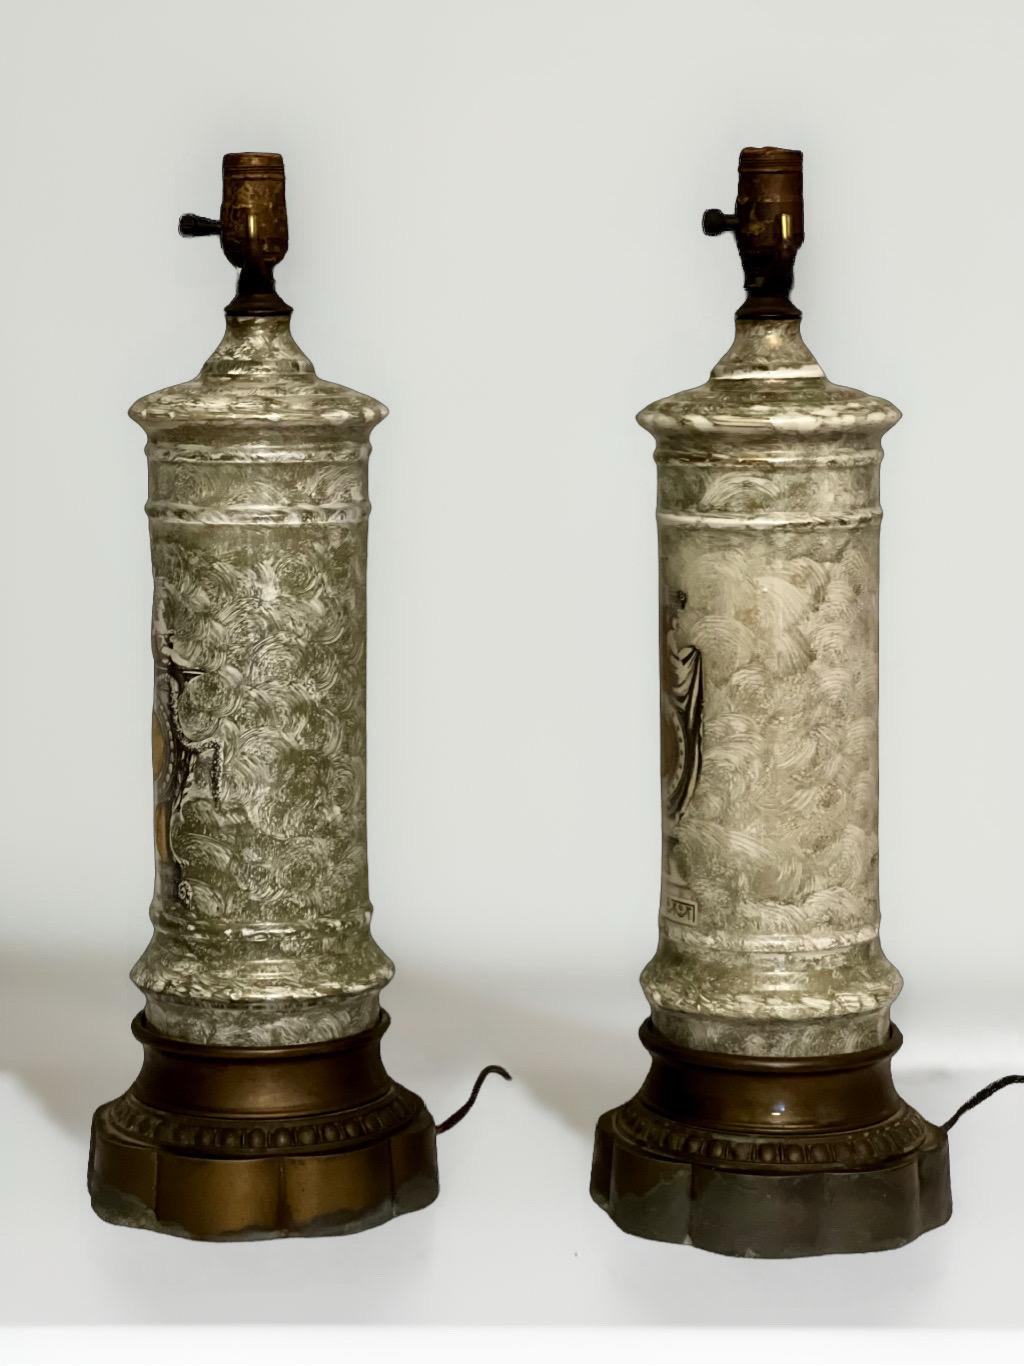 Neoclassical Revival Early 1900s French Neoclassical Reverse Painted Églomisé Lamps, Pair For Sale